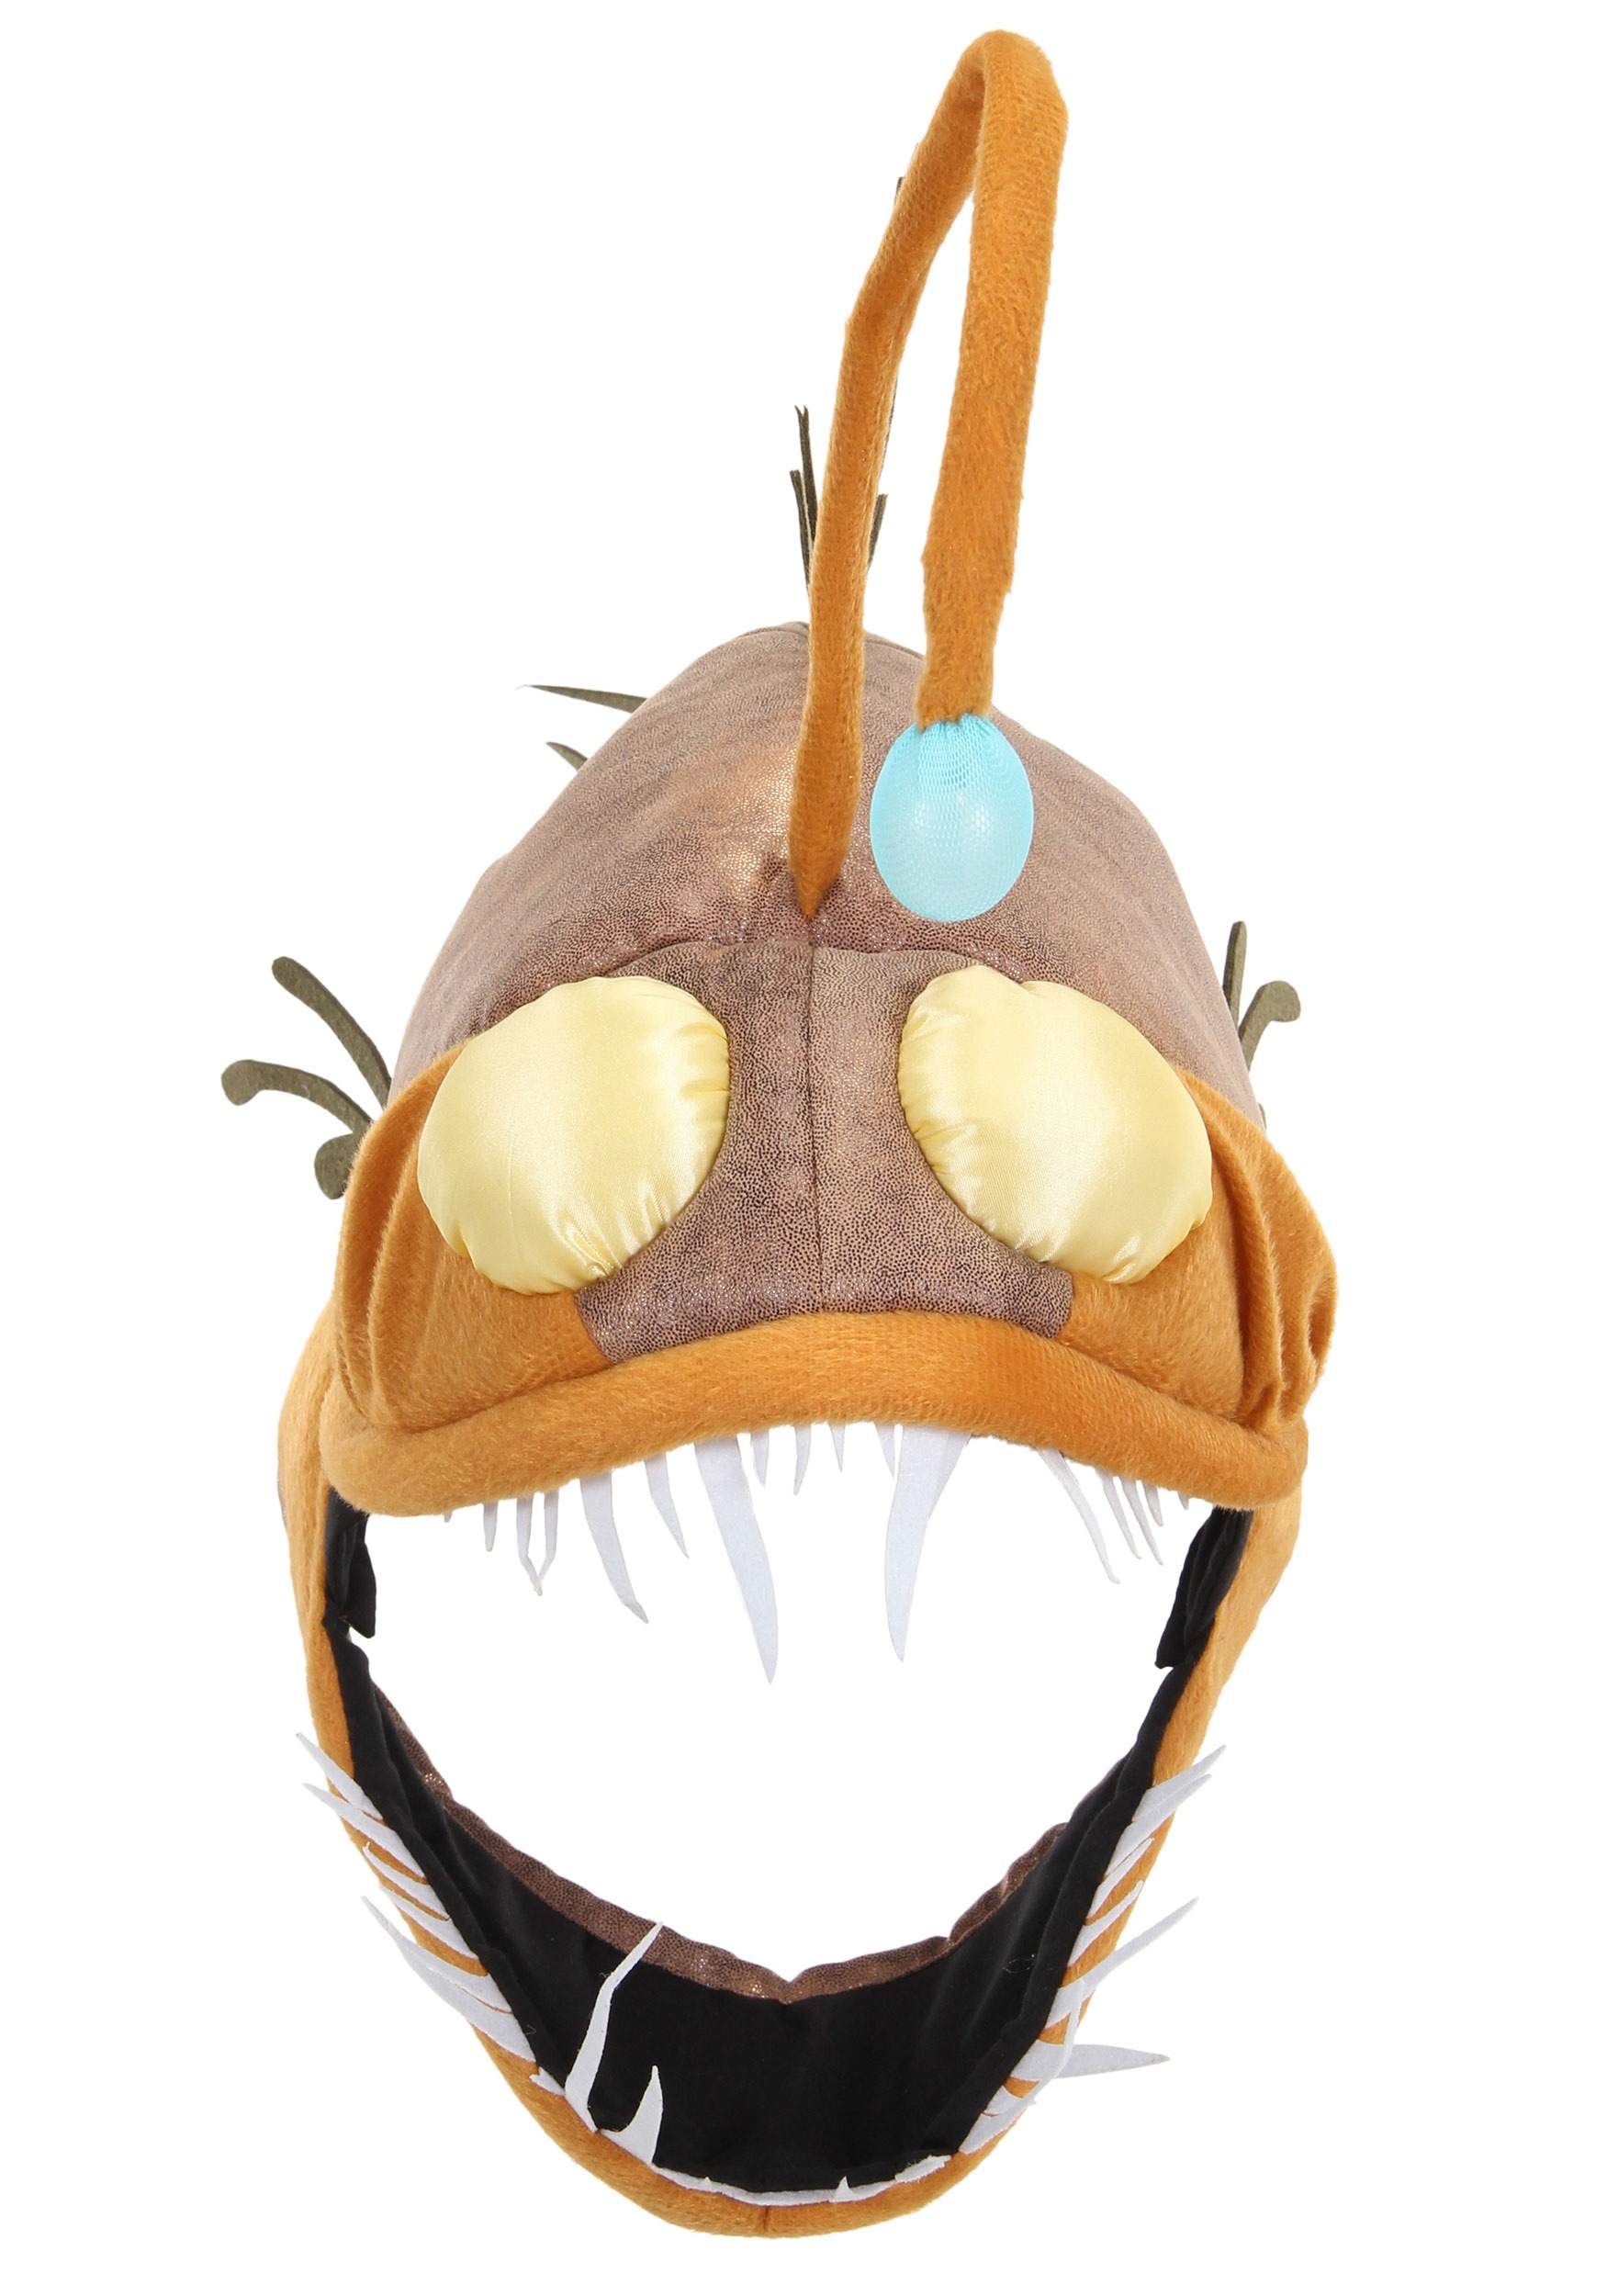 Adult's Light-Up Angler Fish Jawesome Fancy Dress Costume Hat